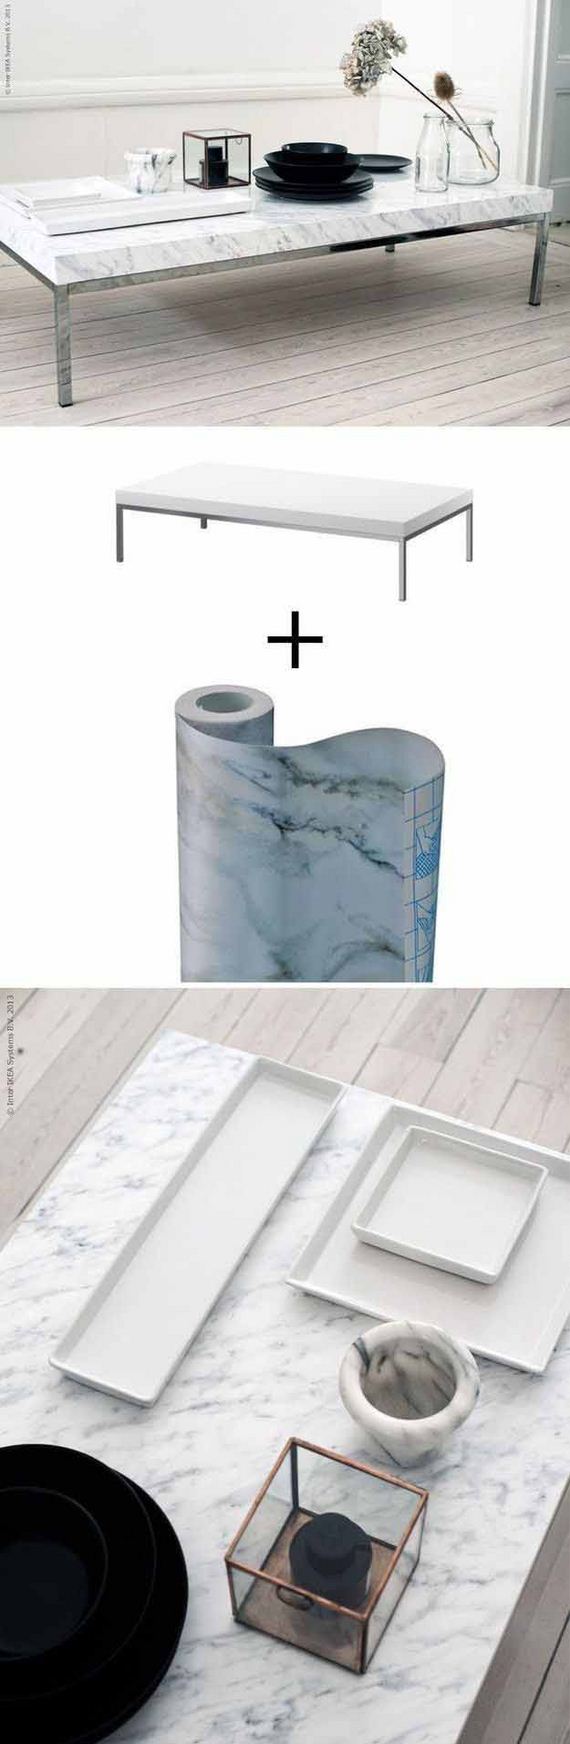 16-DIY-Coffee-Table-Projects